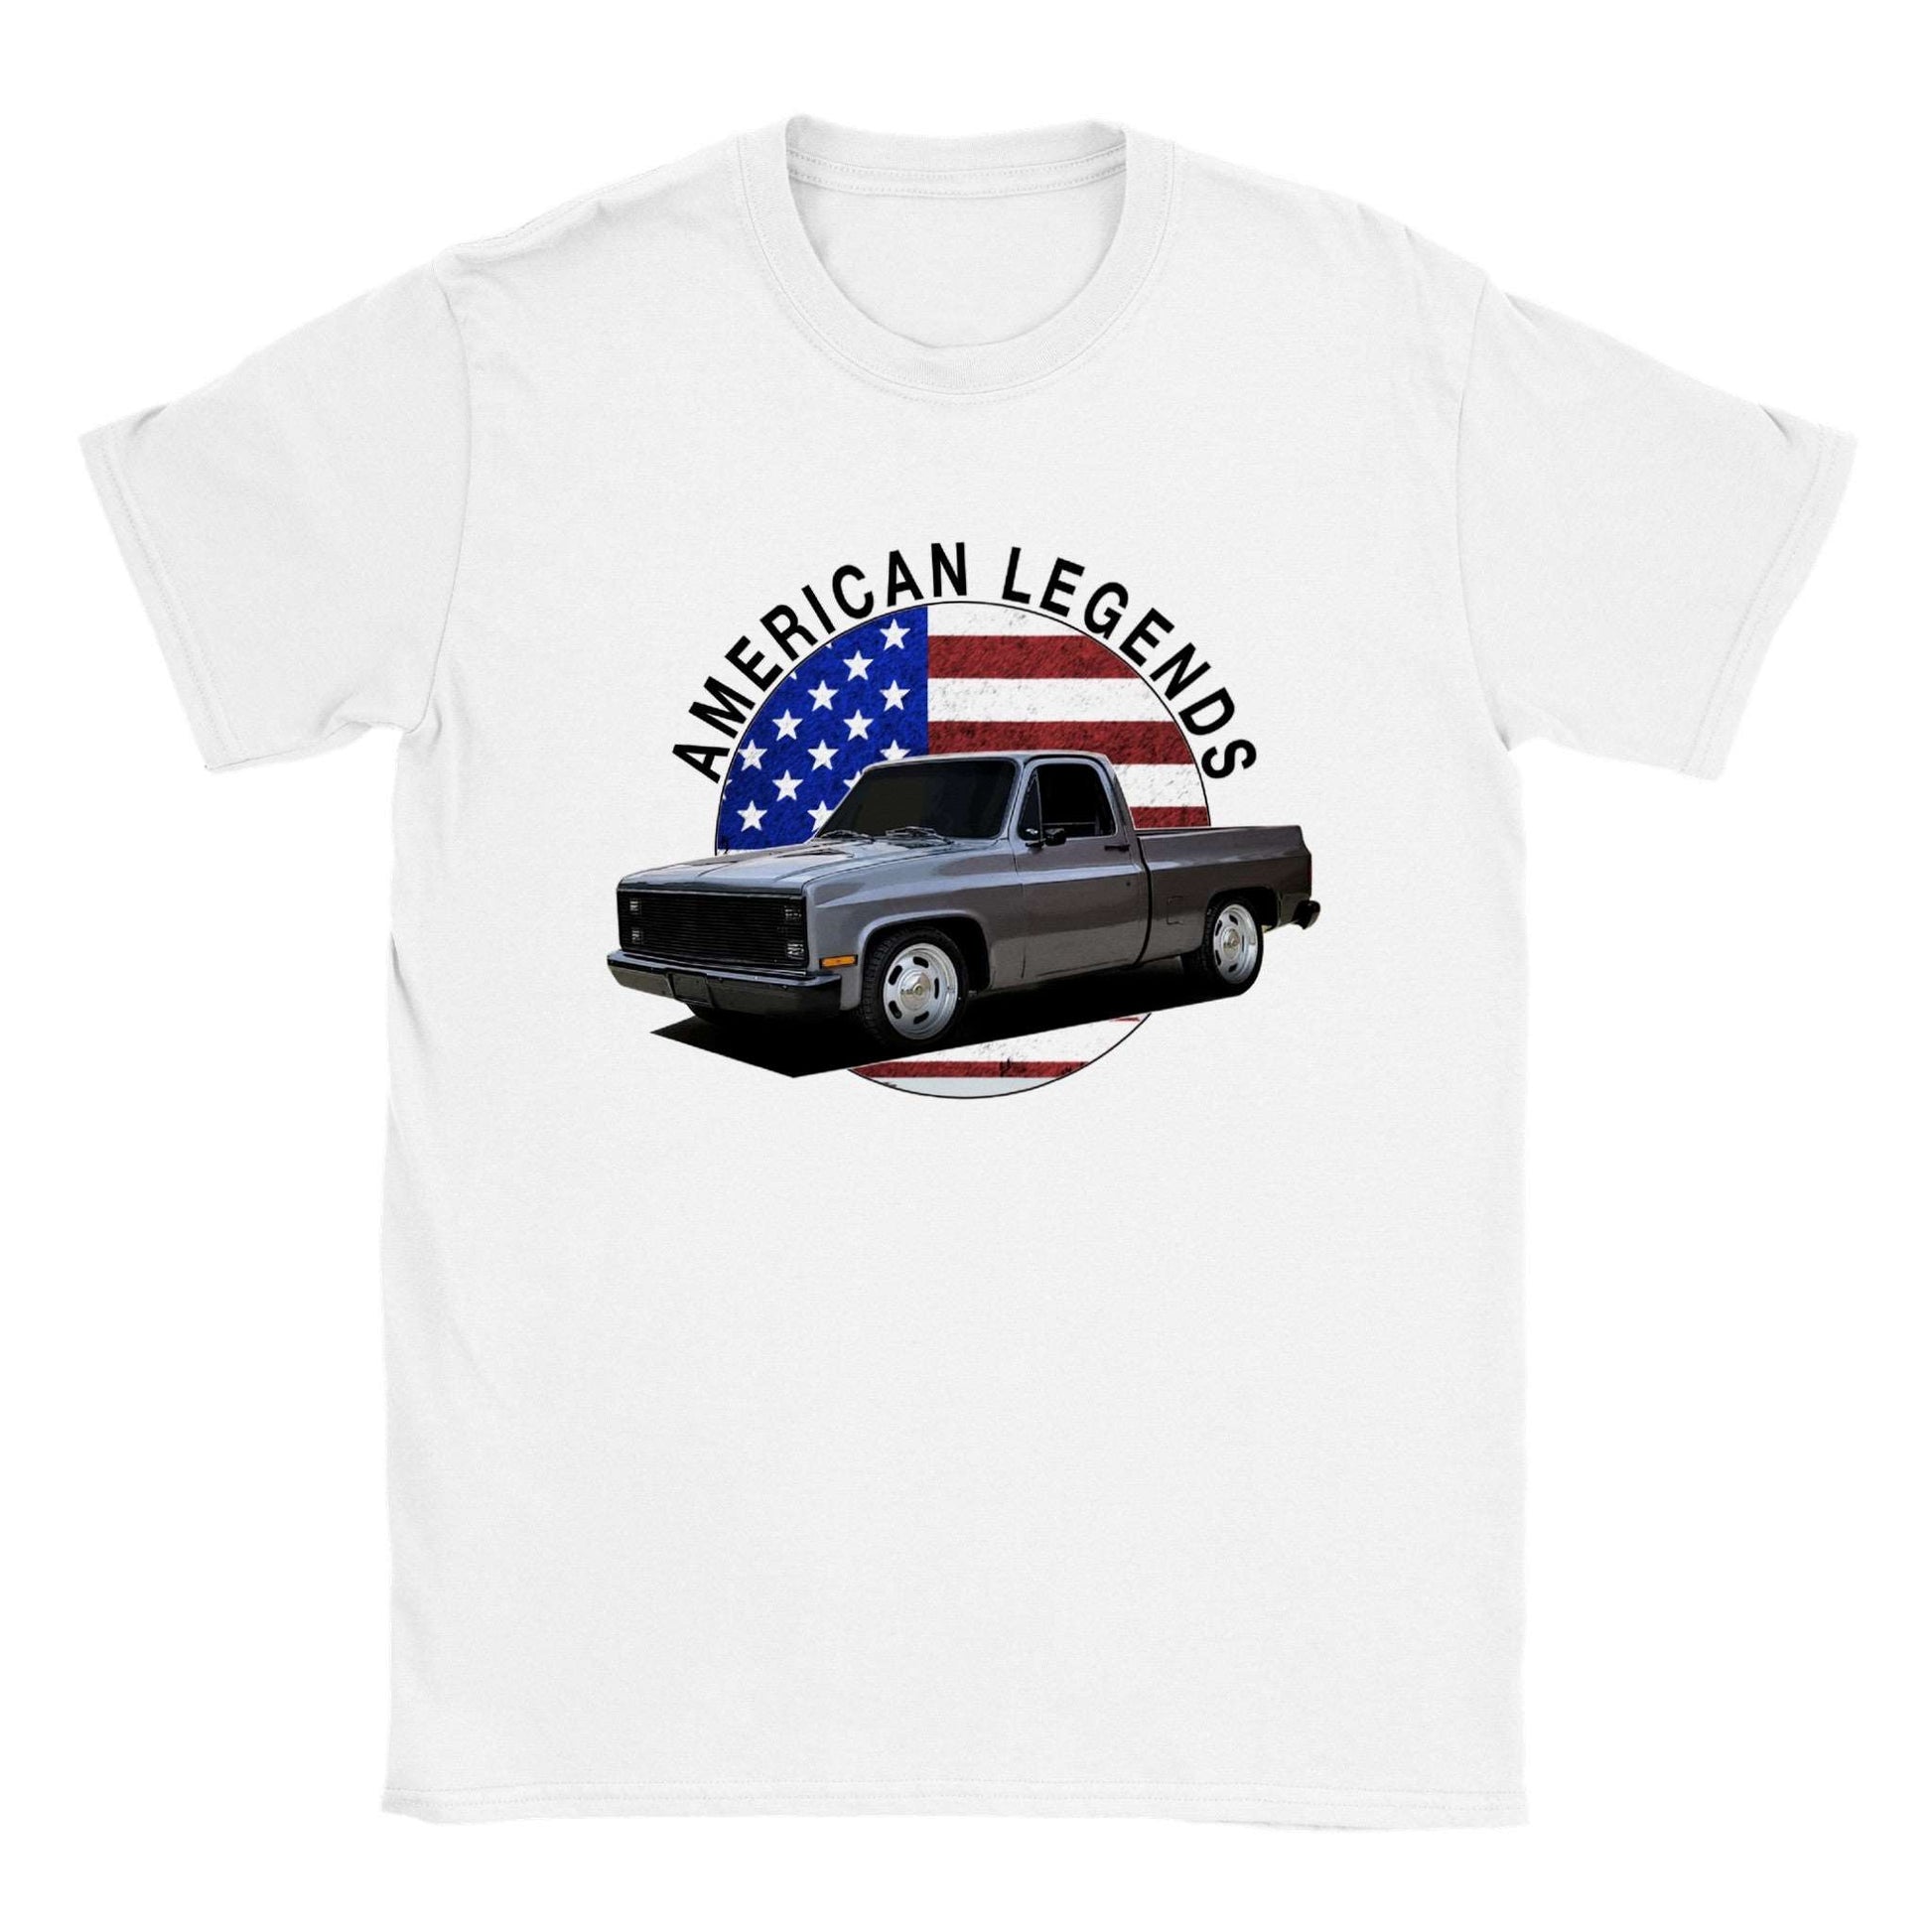 American Legends Chevy Squarebody T-shirt - Mister Snarky's